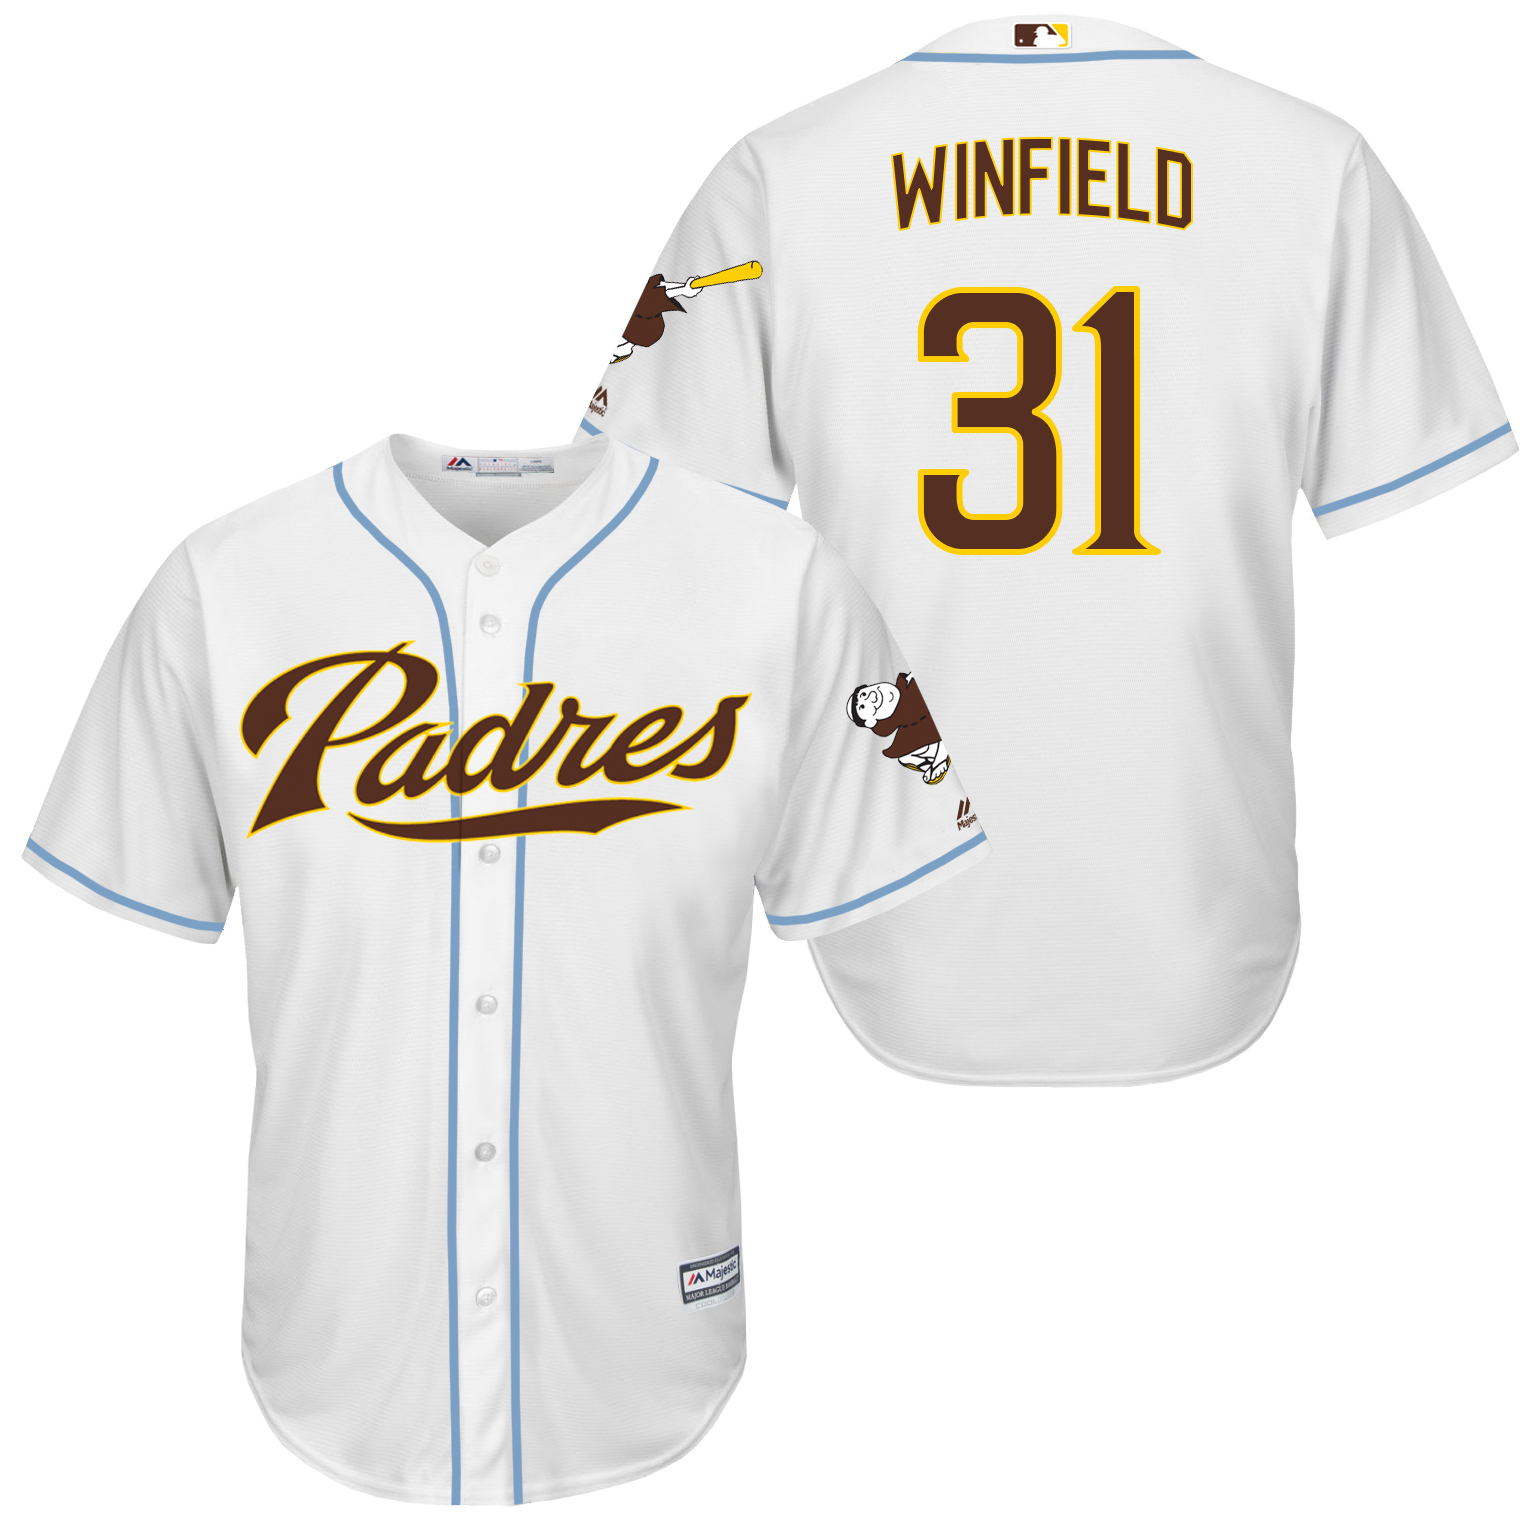 Padres 31 Dave Winfield White New Cool Base Jersey